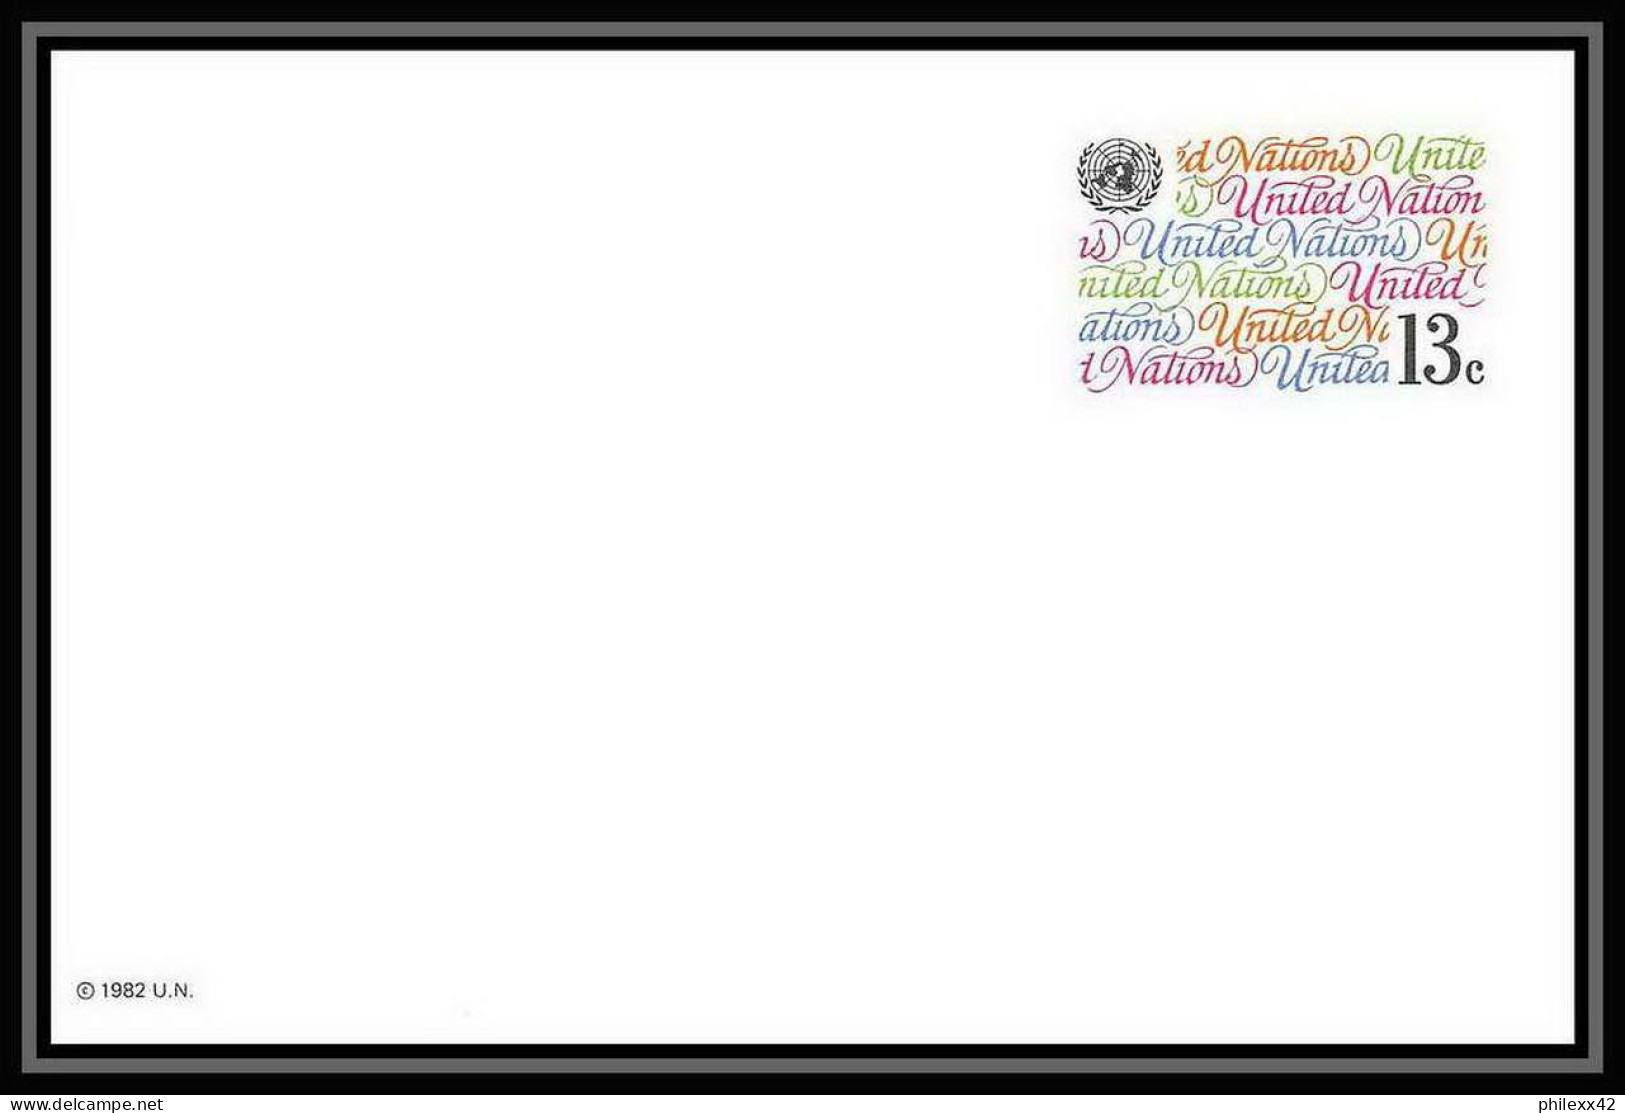 4283/ Nations Unies (united Nations) Entier Stationery Carte Postale (postcard) 13c Neuf (mint) Tb - Lettres & Documents